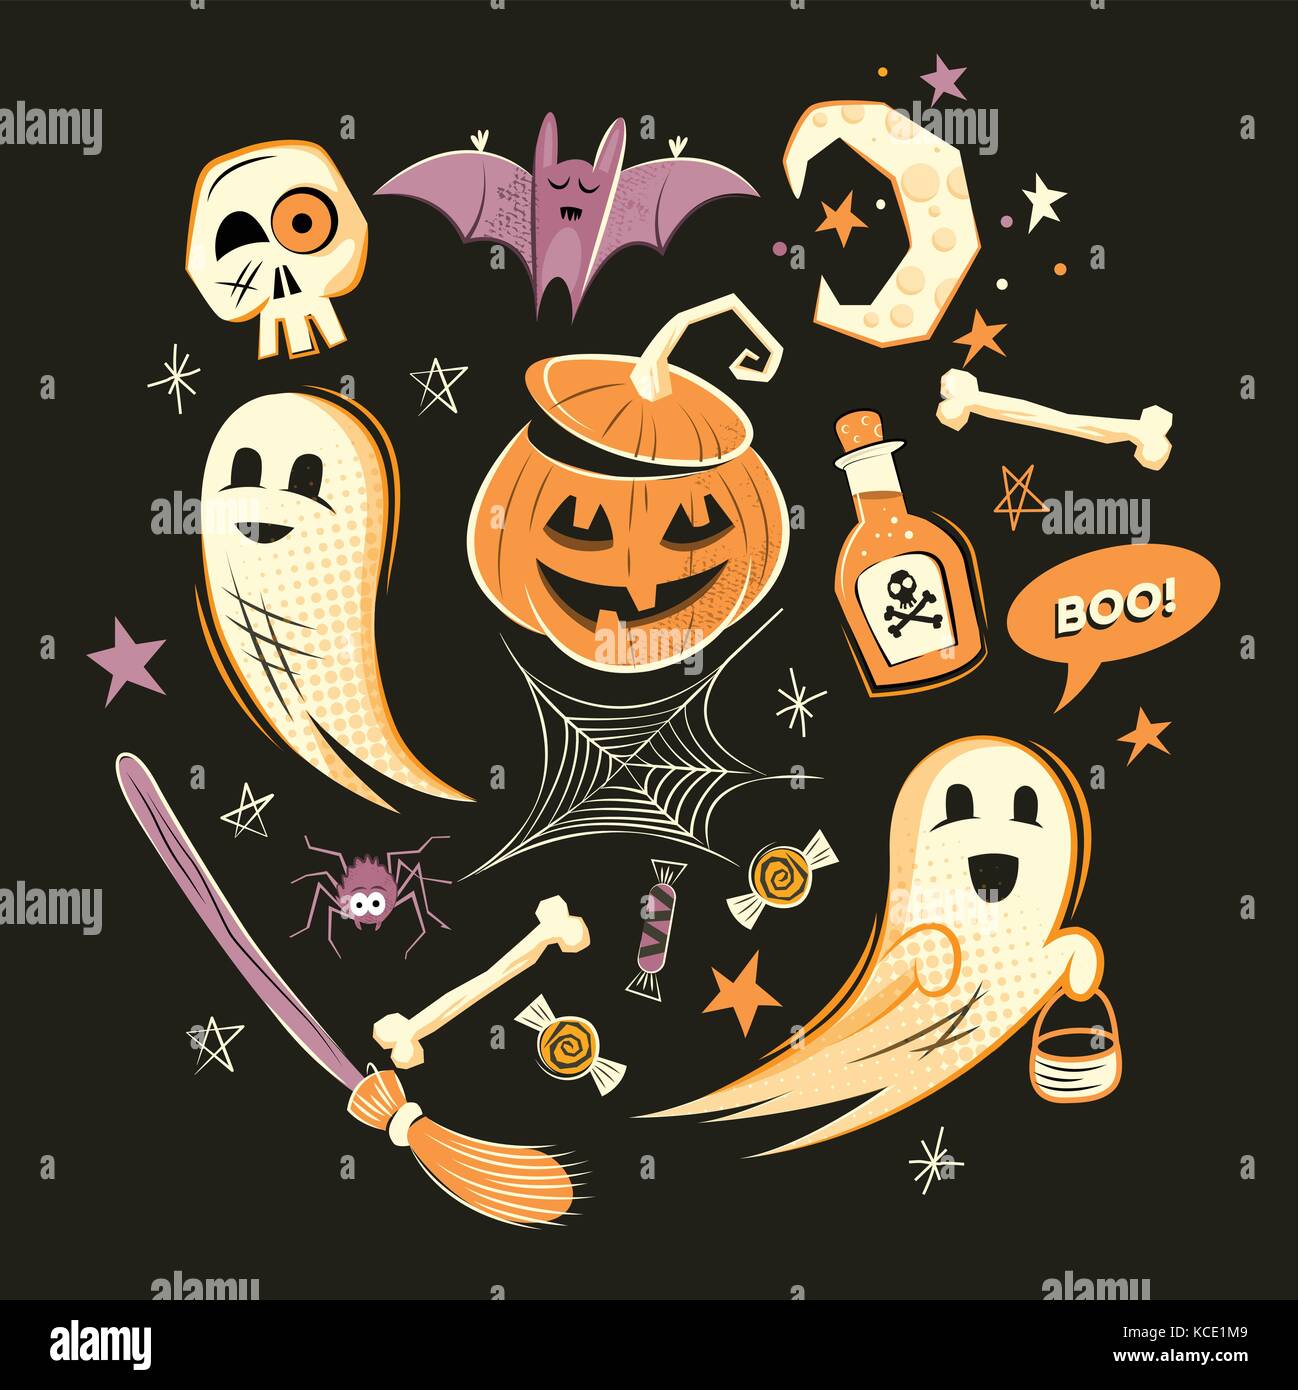 Halloween design vector decorations and characters. Stock Vector